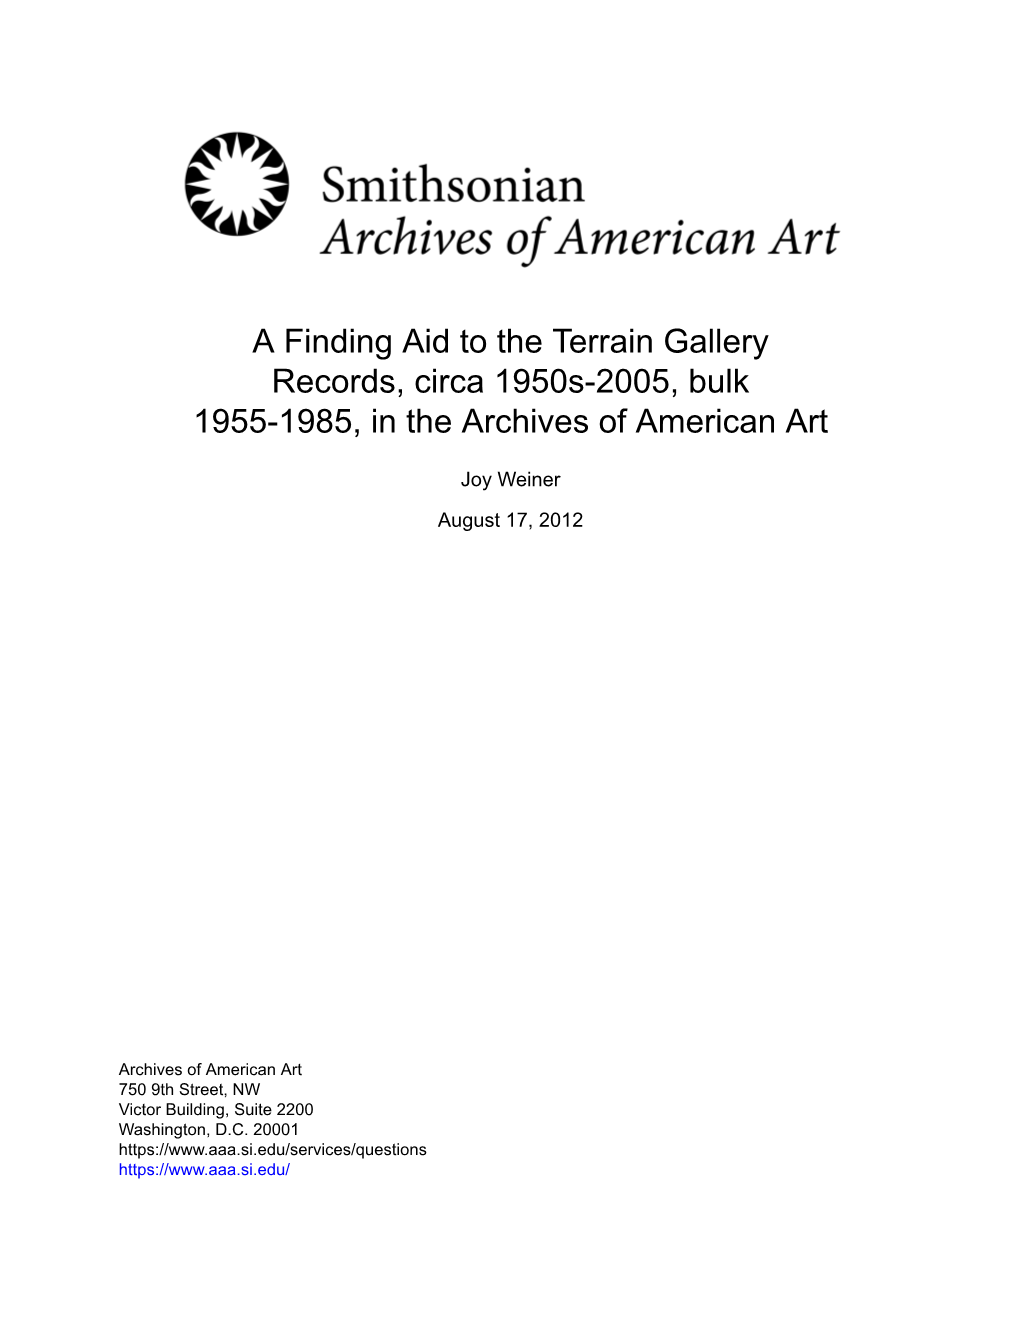 A Finding Aid to the Terrain Gallery Records, Circa 1950S-2005, Bulk 1955-1985, in the Archives of American Art